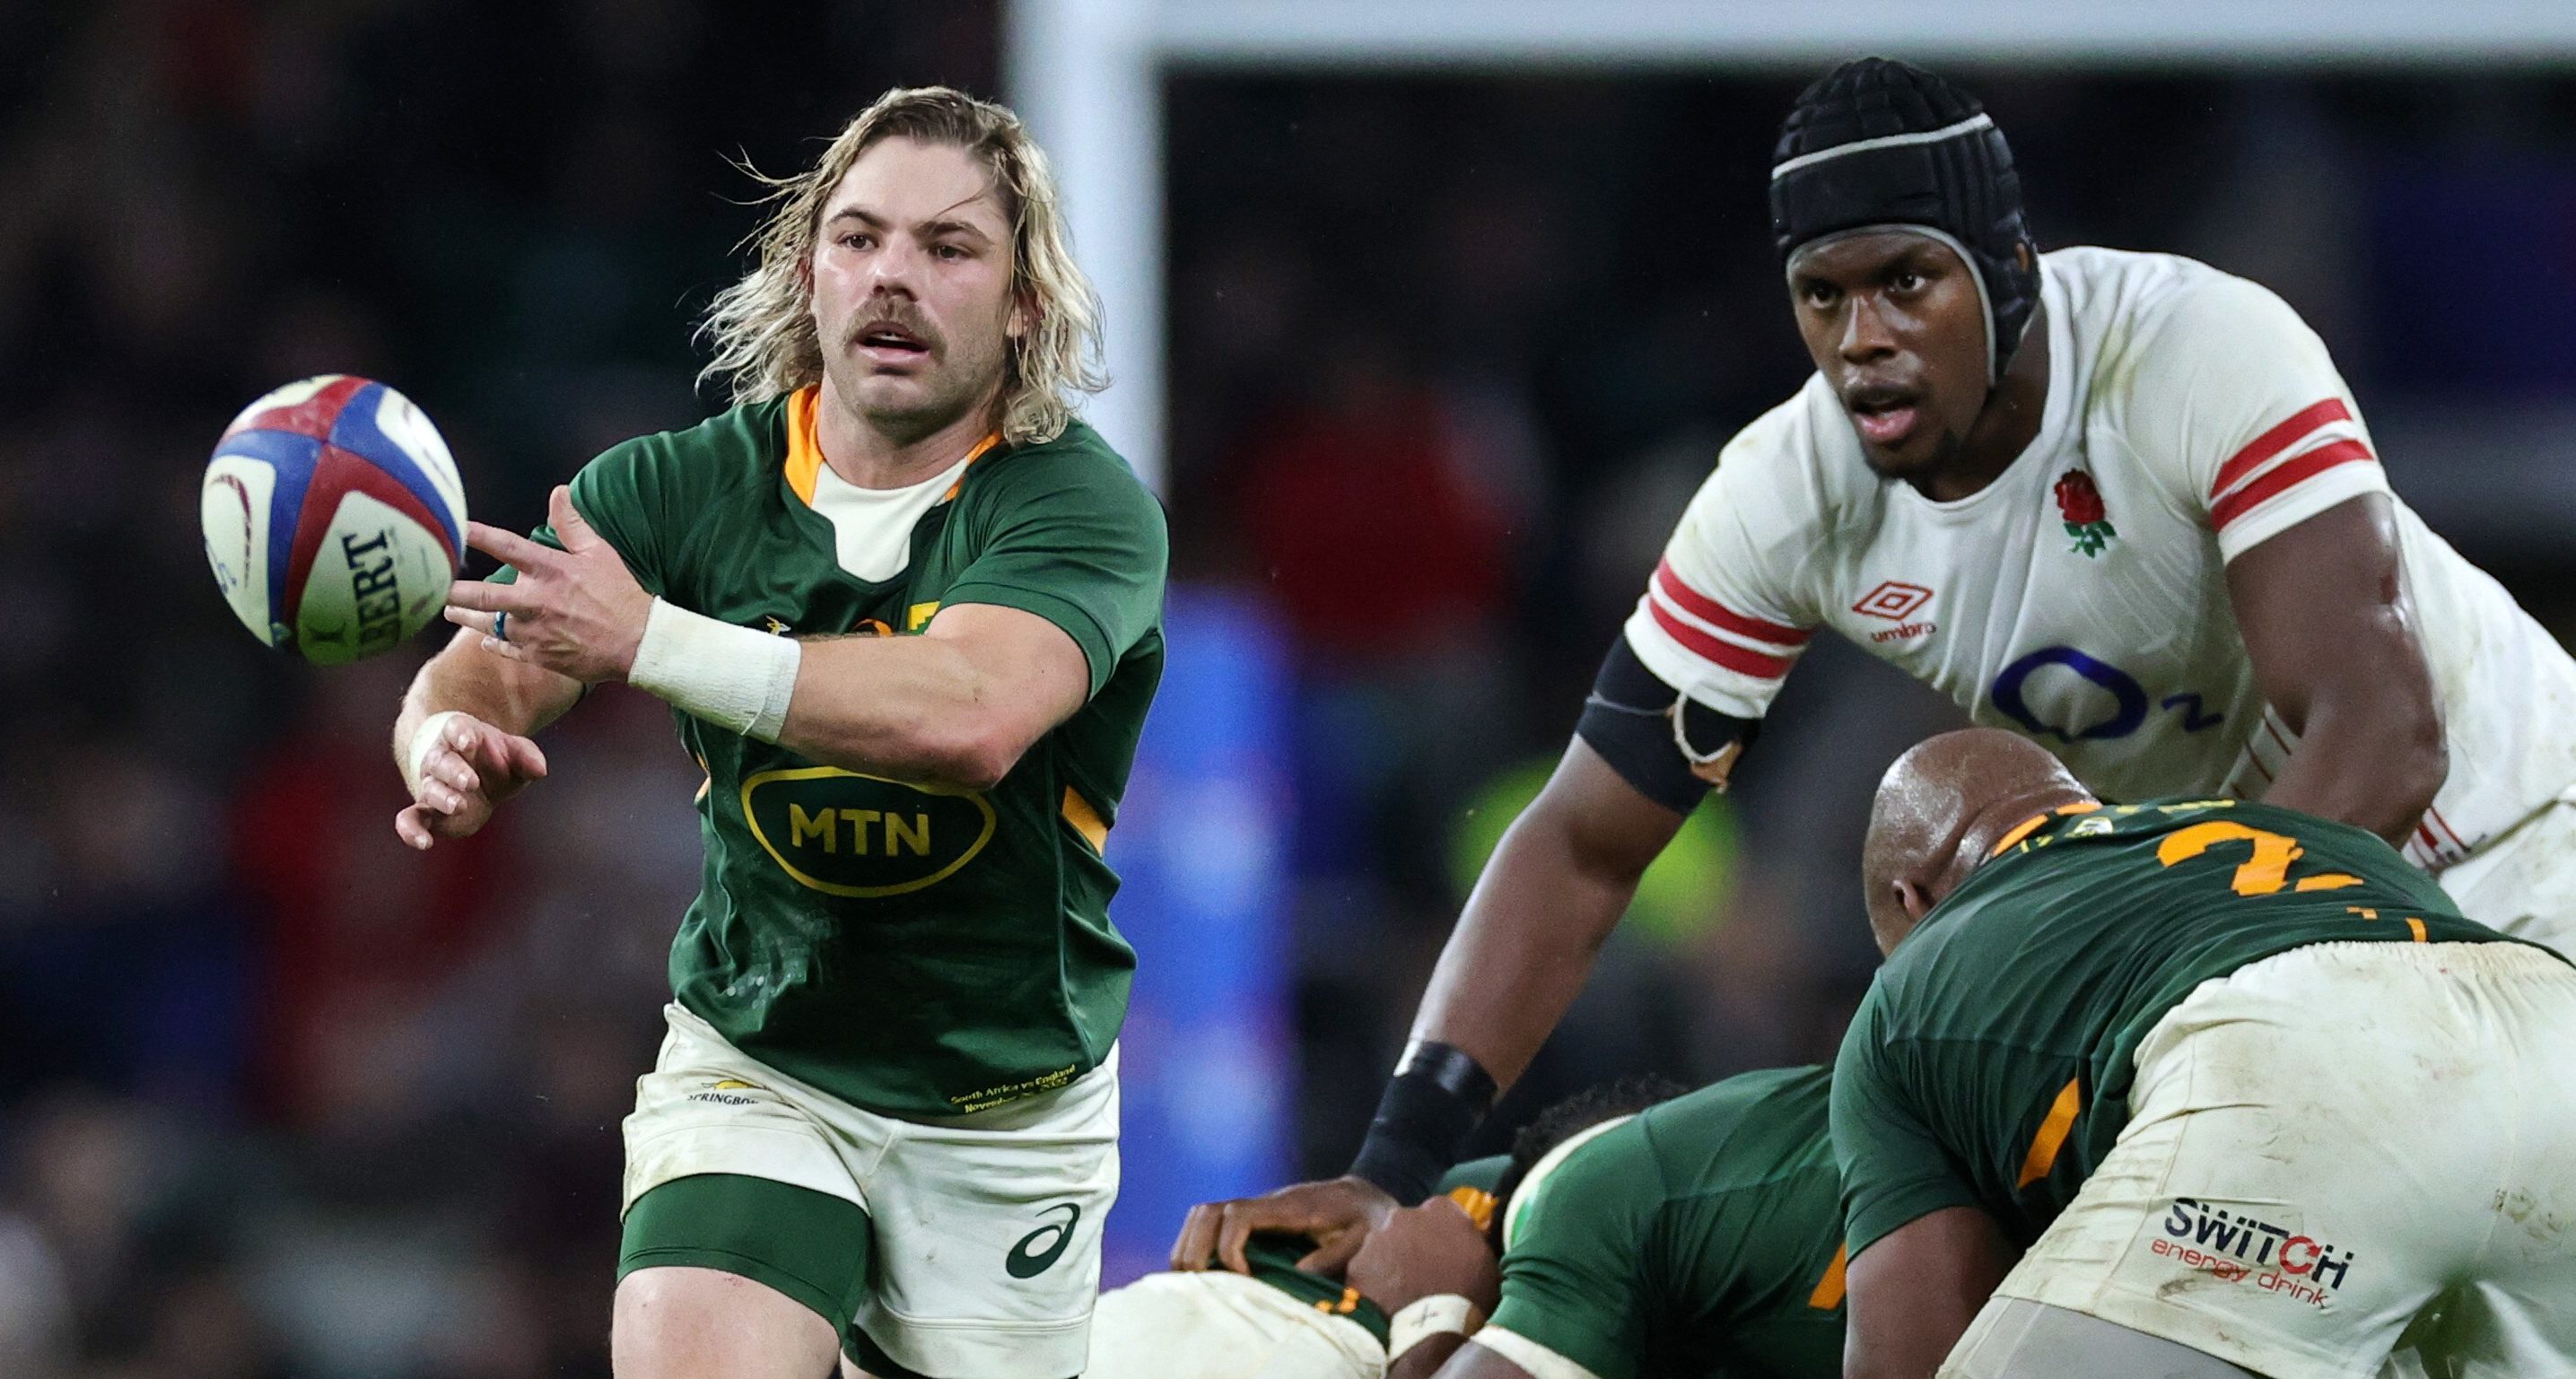 LONDON, ENGLAND - NOVEMBER 26: Faf de Klerk of South Africa passes the ball during the Autumn International match between England and South Africa at Twickenham Stadium on November 26, 2022 in London, England. (Photo by David Rogers/Getty Images)